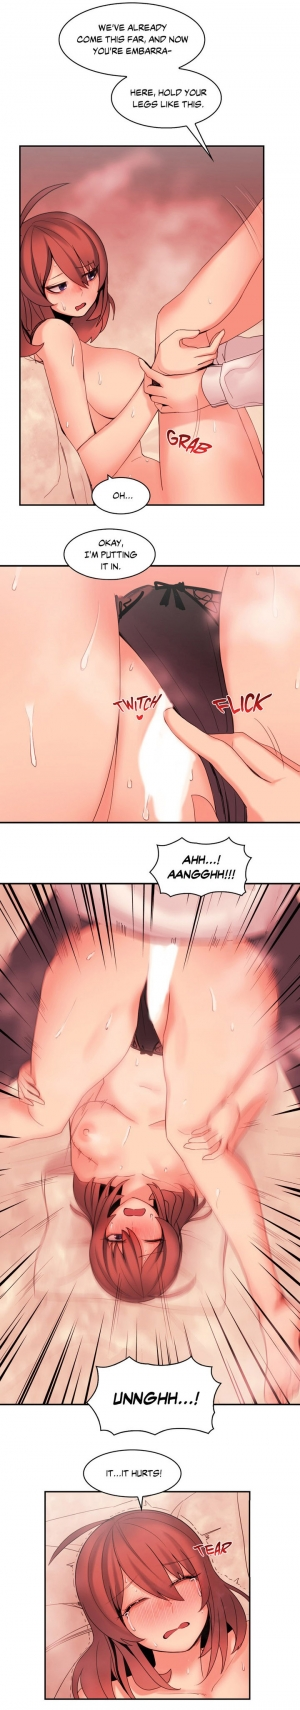 [Gaehoju, Gunnermul] The Girl That Got Stuck in the Wall Ch.11/11 [COMPLETED] [English] [Hentai Universe] - Page 133